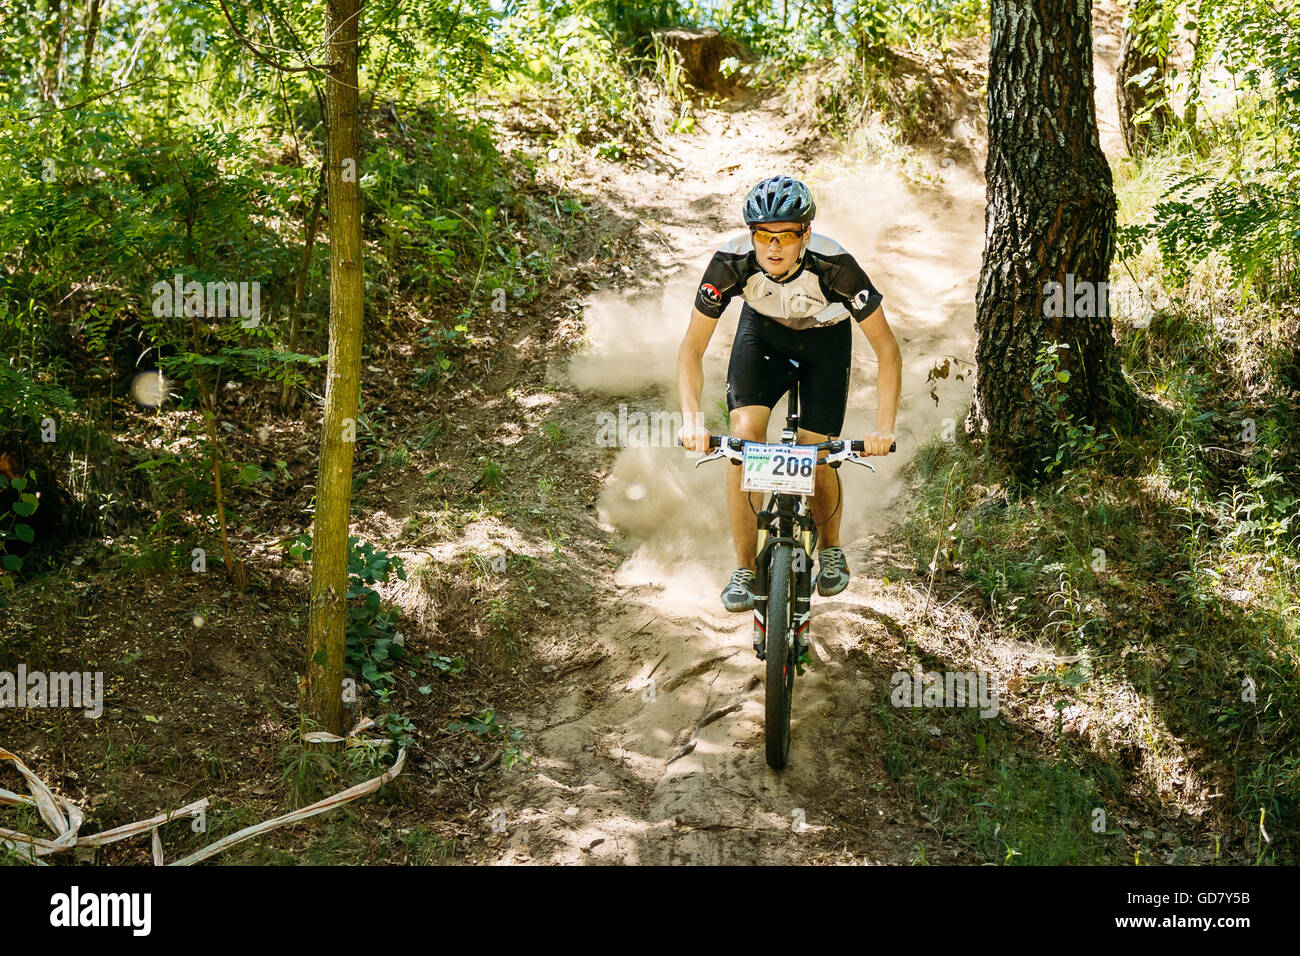 GOMEL, BELARUS - JUNE 7, 2015: Mountain Bike cyclist riding track at sunny day, healthy lifestyle active athlete doing sport Stock Photo